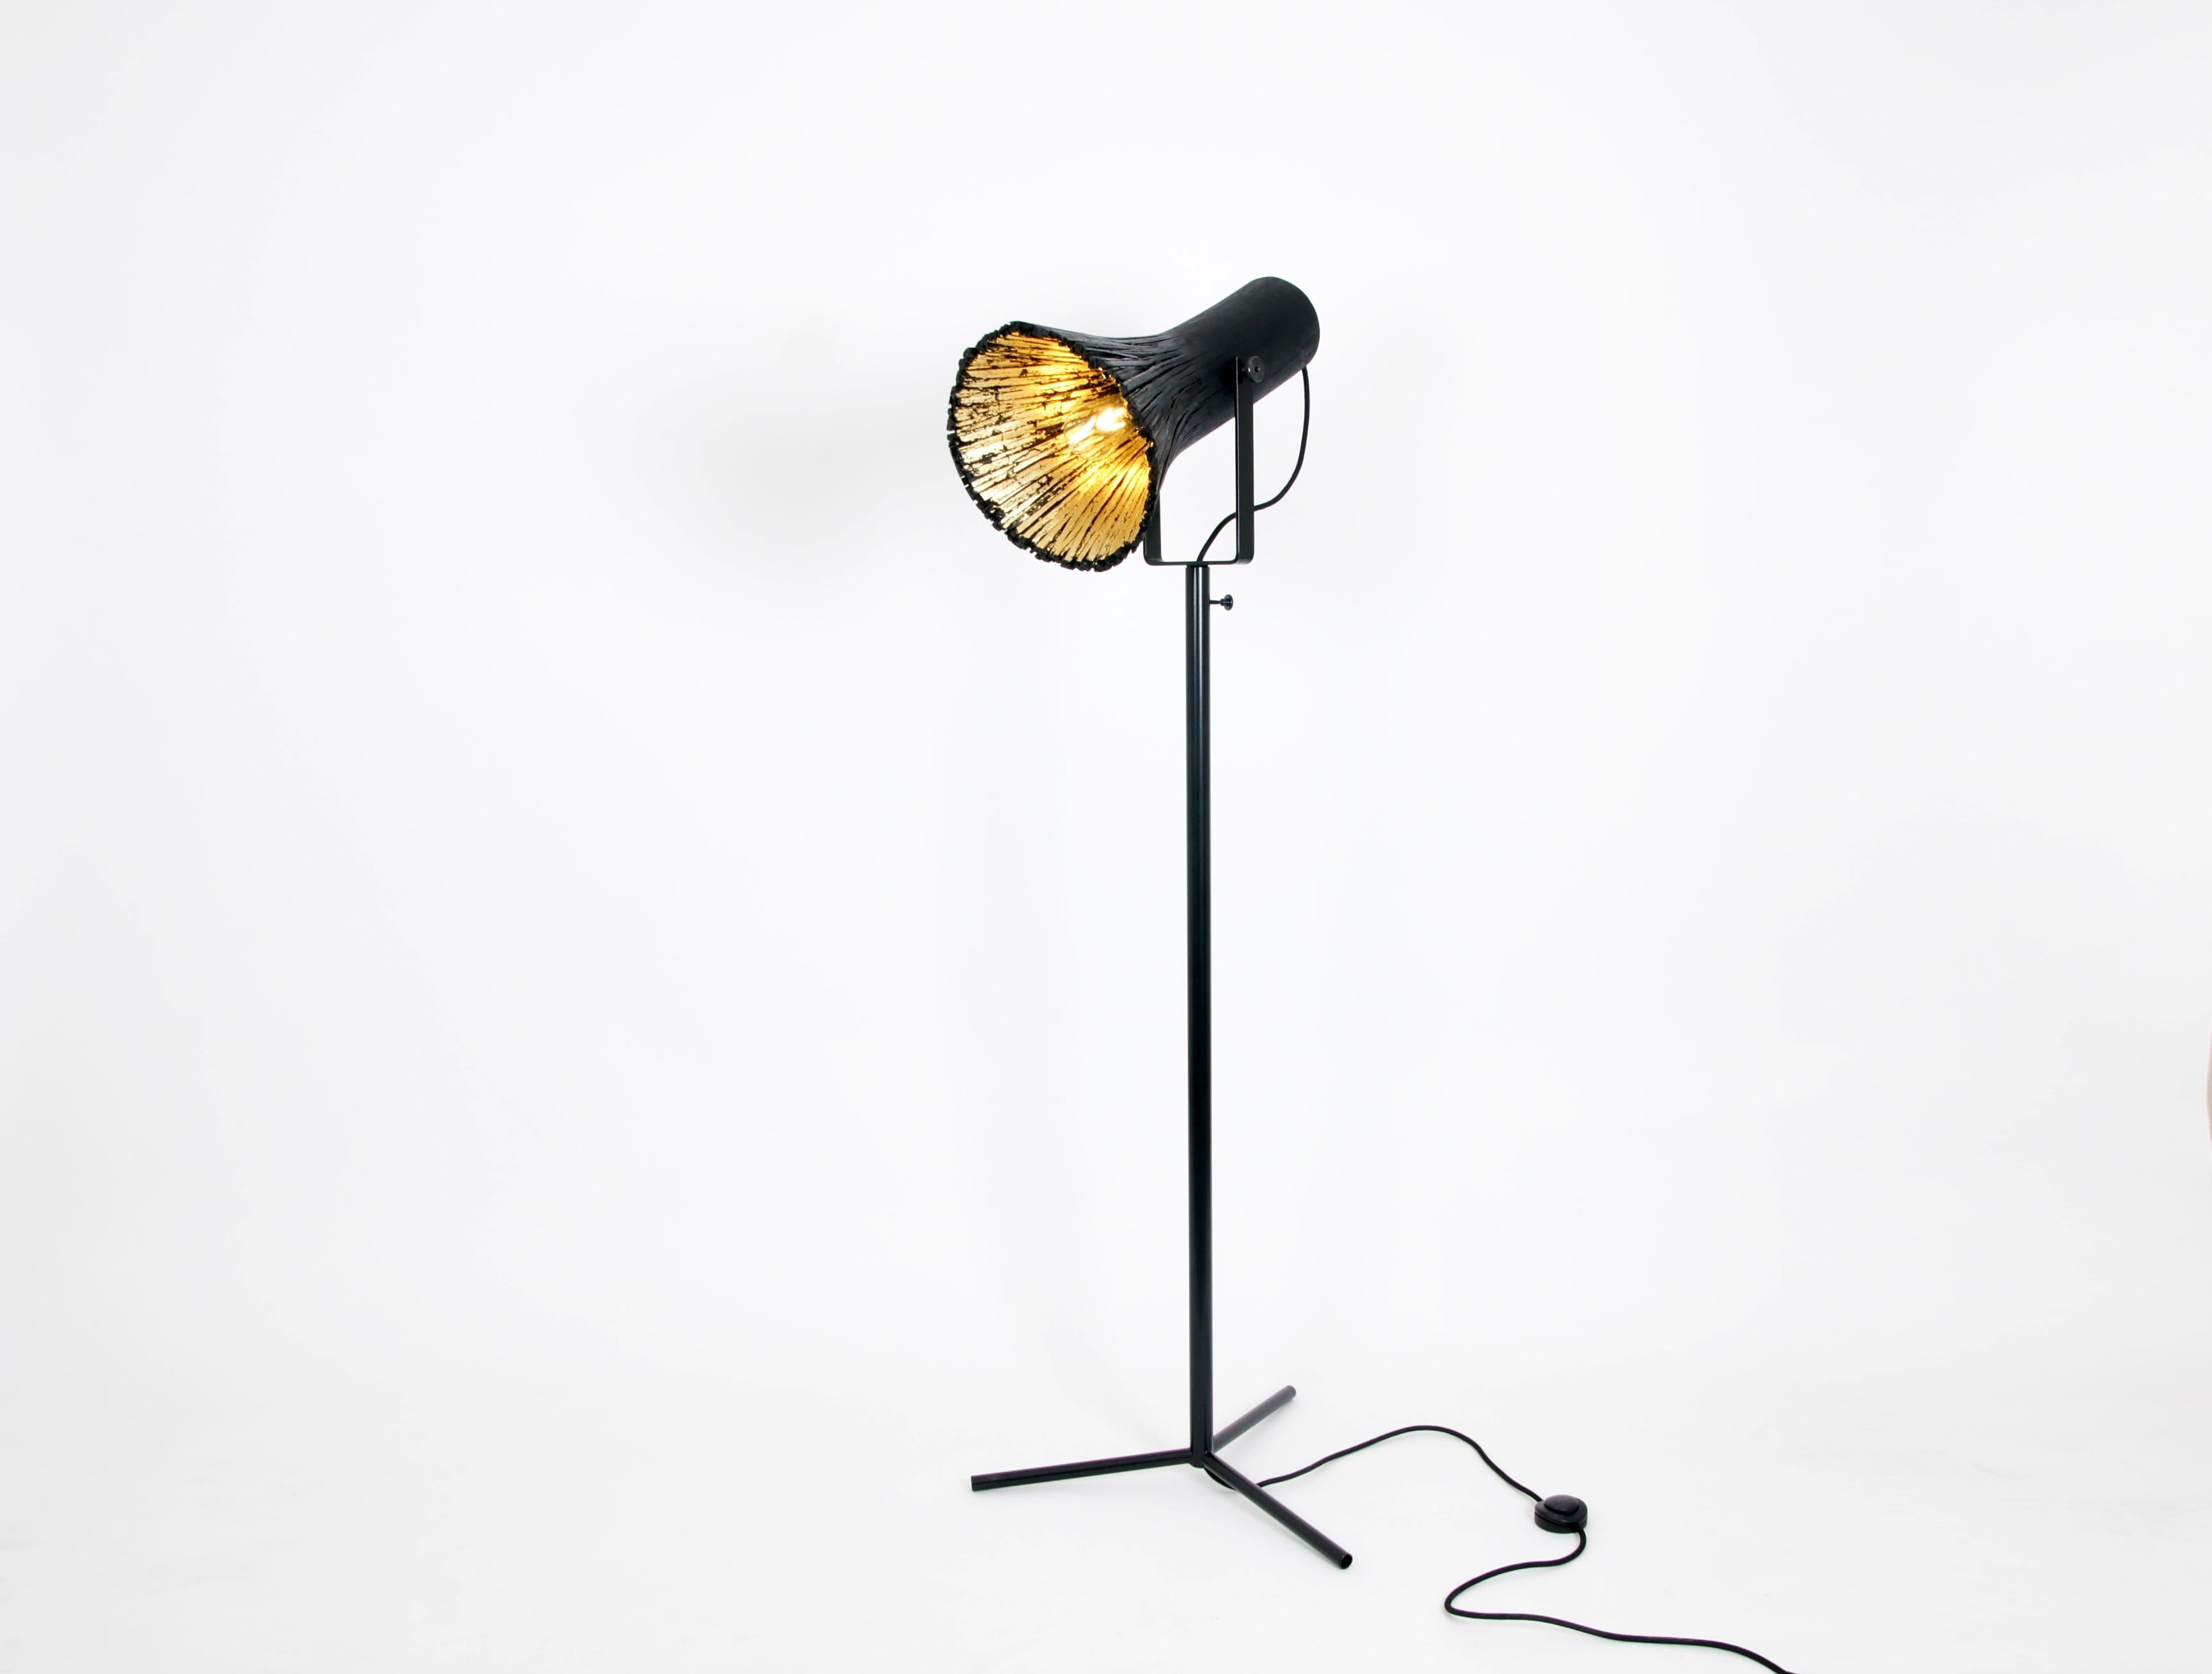 Black pressed wood floor lamp by Johannes Hemann.
Materials: Wood, brass
Dimensions: Height 130cm, Ø 35cm.

The series „pressed wood“ is based on the traditional technique of bentwood, but Johannes Hemann combined it with pressure to get a